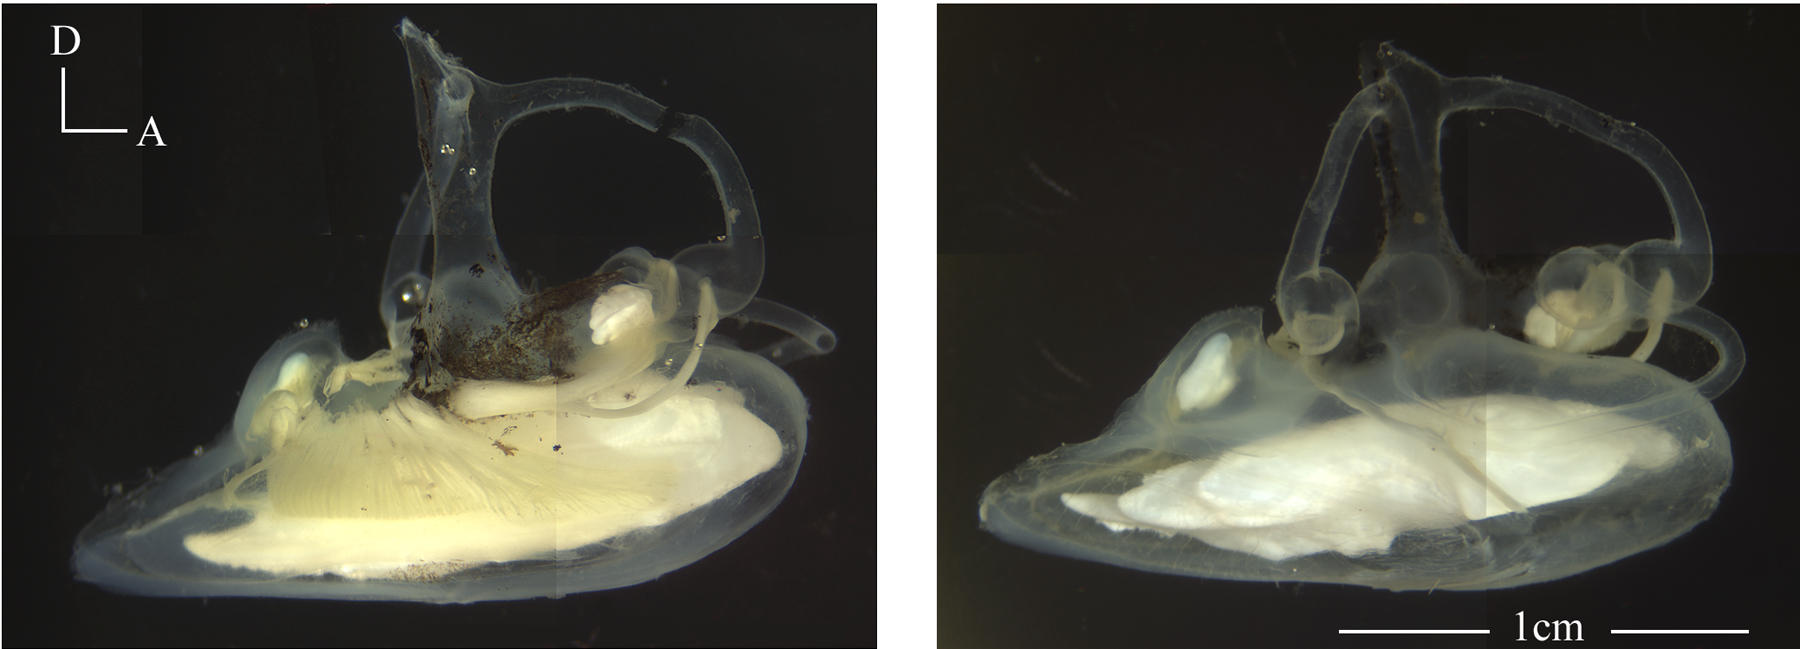 These are pictures of the left and right ears of the blue antimora (Antimora rostrata), a deep-sea cod. In the picture of the right ear (on the right), you can clearly see the three otolith organs as white objects. The saccular otolith in this species is very large and heavy. Copyright Xiaohong Deng, Neuroscience and Cognitive Science Program, University of Maryland. http://www.life.umd.edu/biology/popperlab/research/deepsea.htm.